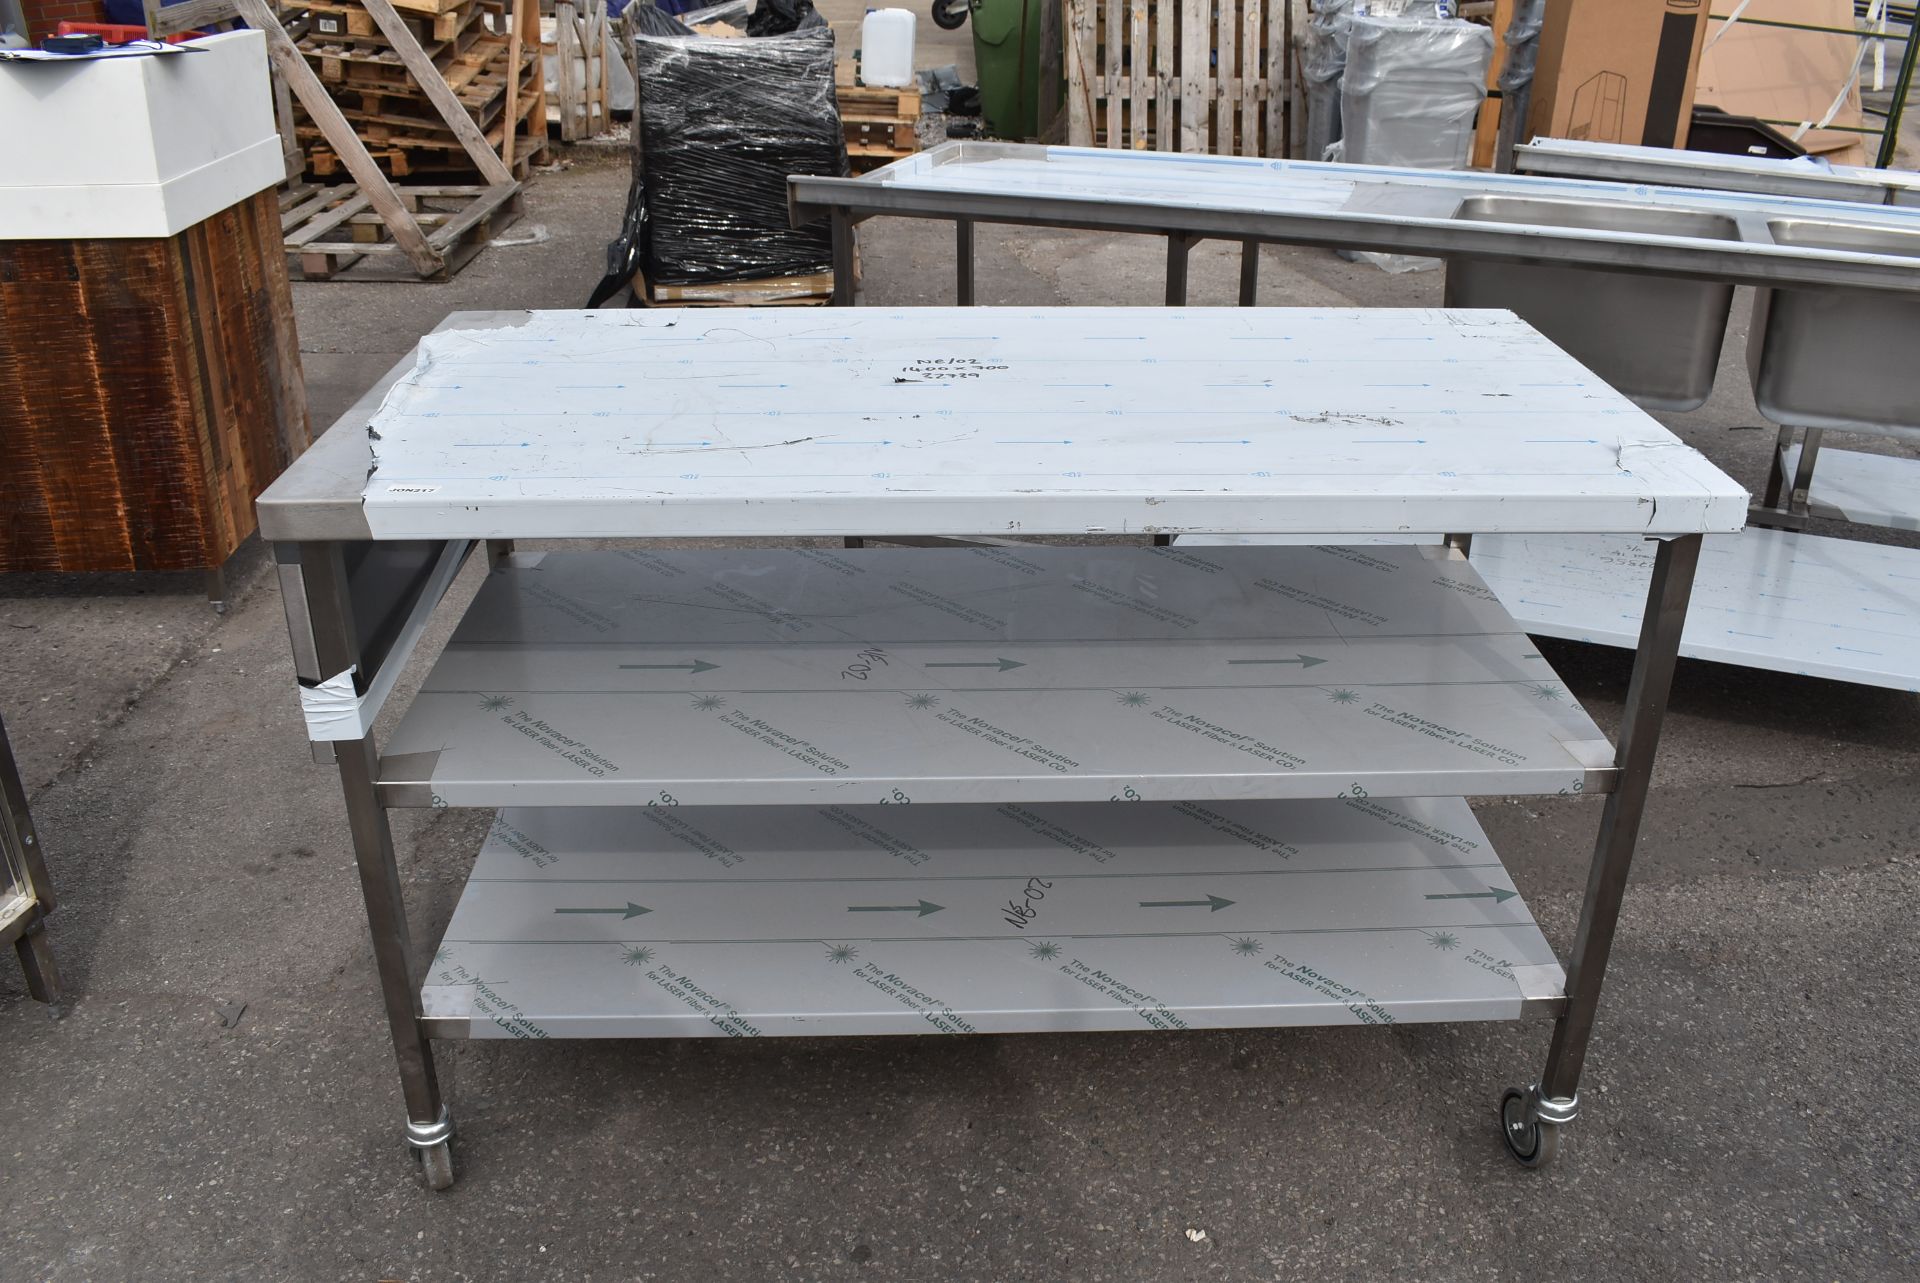 1 x Stainless Steel Prep Table With Castor Wheels and Multiple Undeshelves - Image 5 of 6